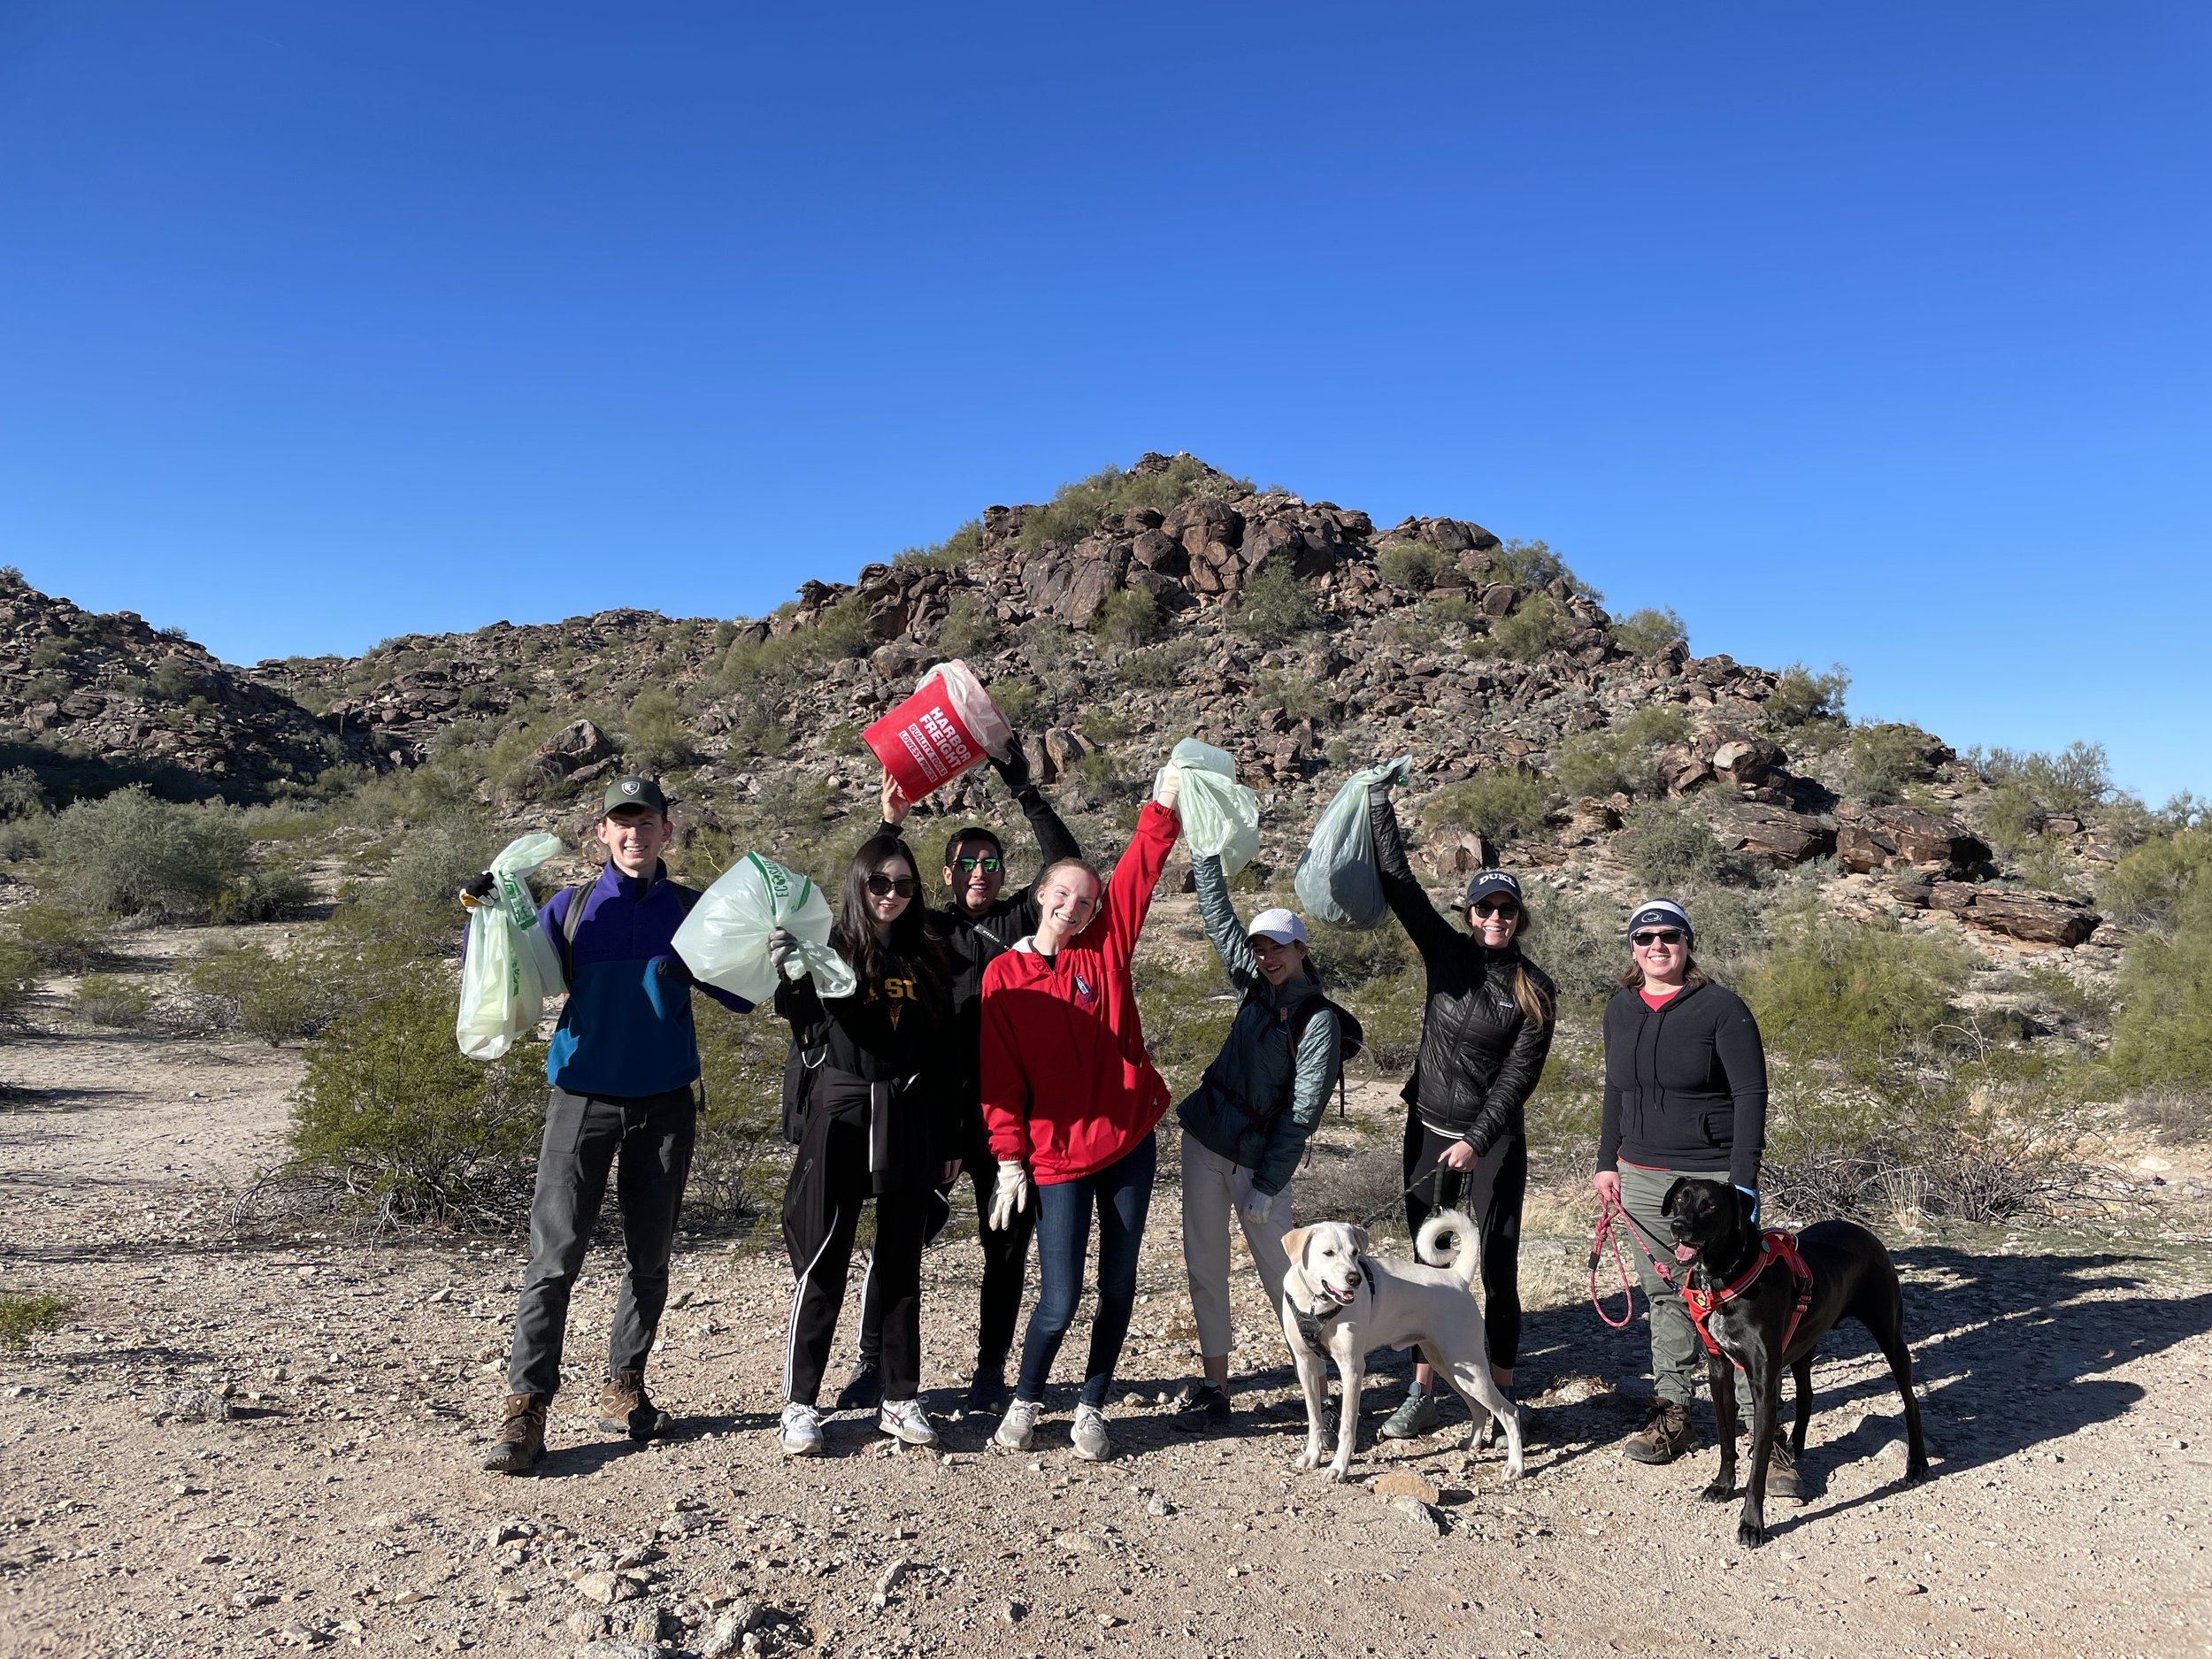  ASU Developmental Psychology Area took to the trails for a desert clean up event!  